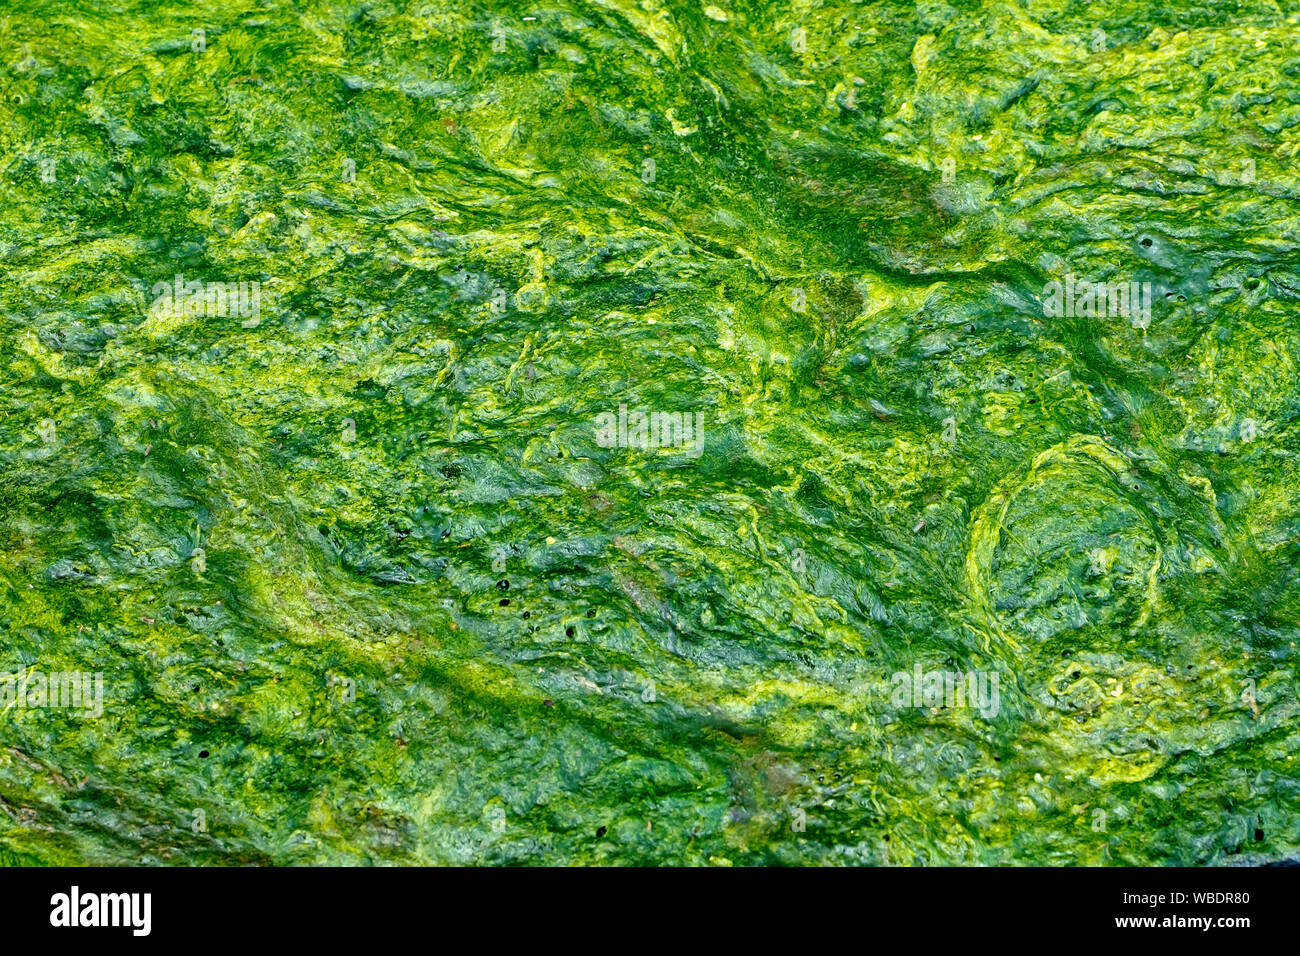 An abstract image of a mat of algae and pond weed gathered at the edge of a small pond. Stock Photo